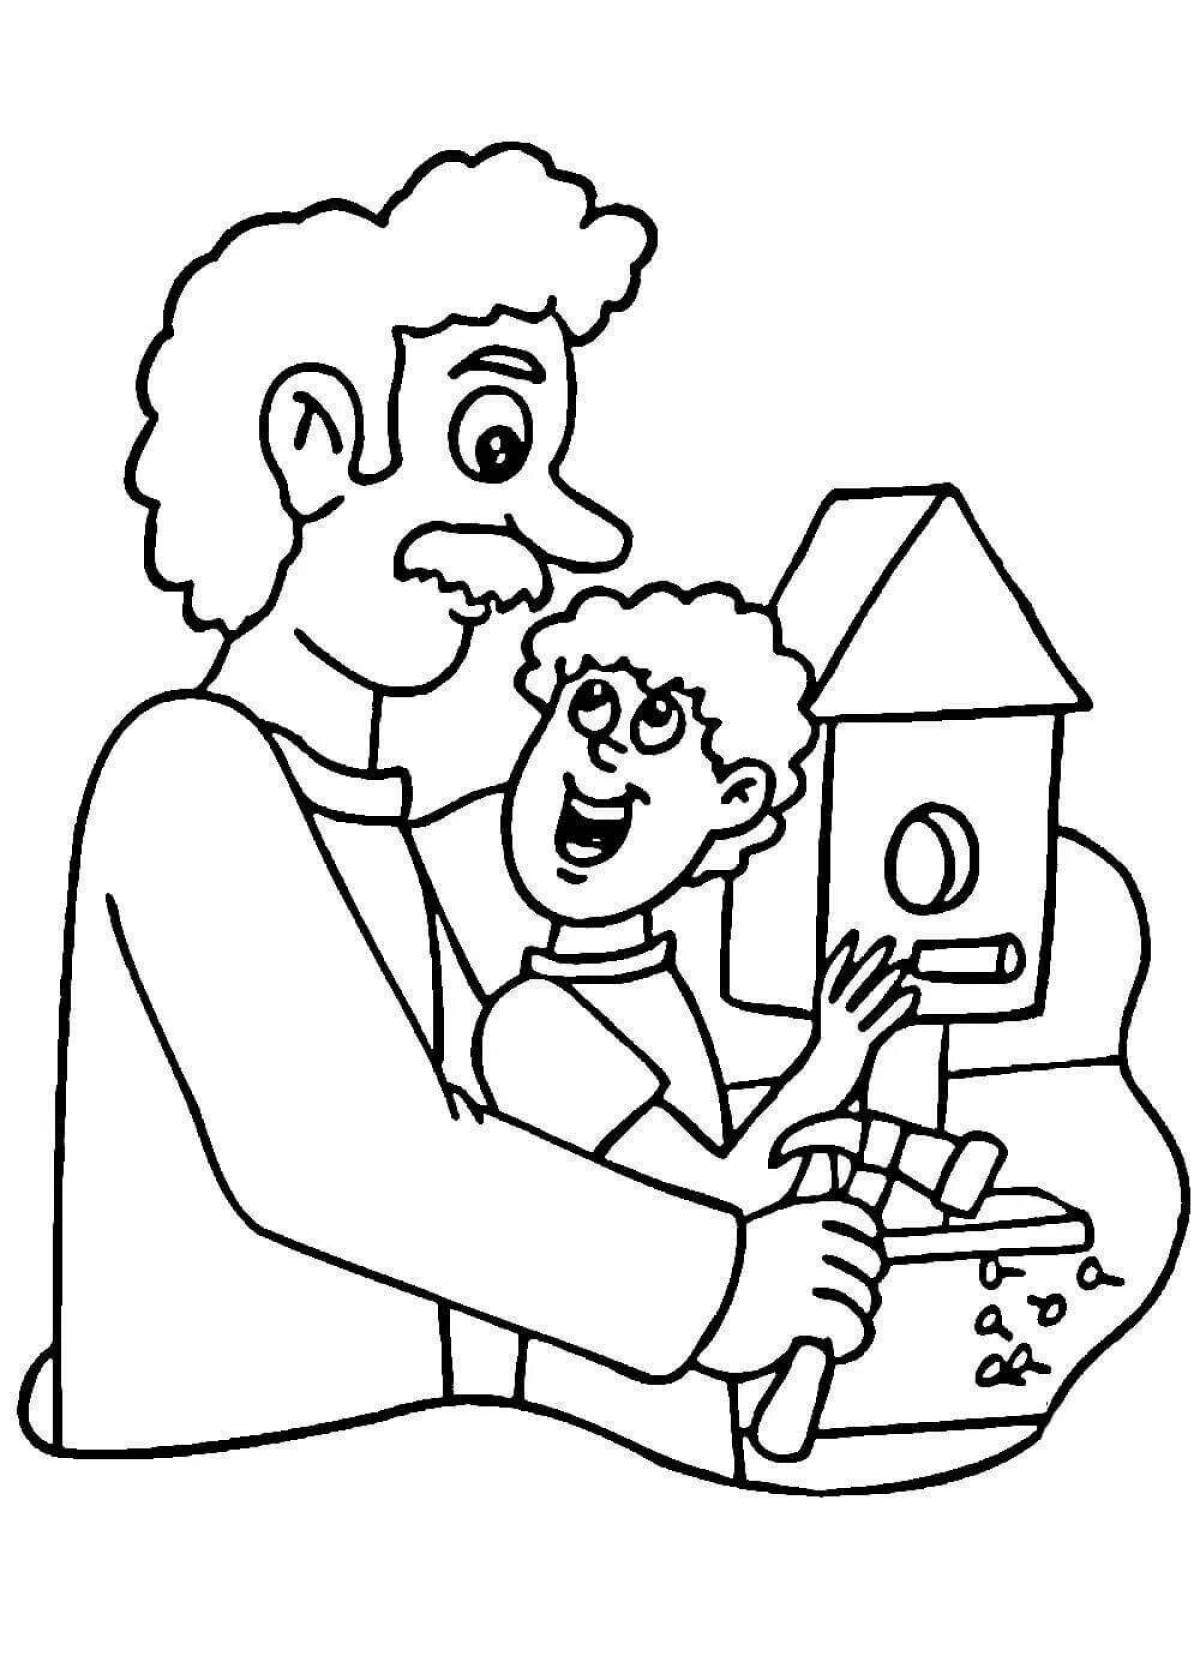 Son and Dad Luminous Coloring Page